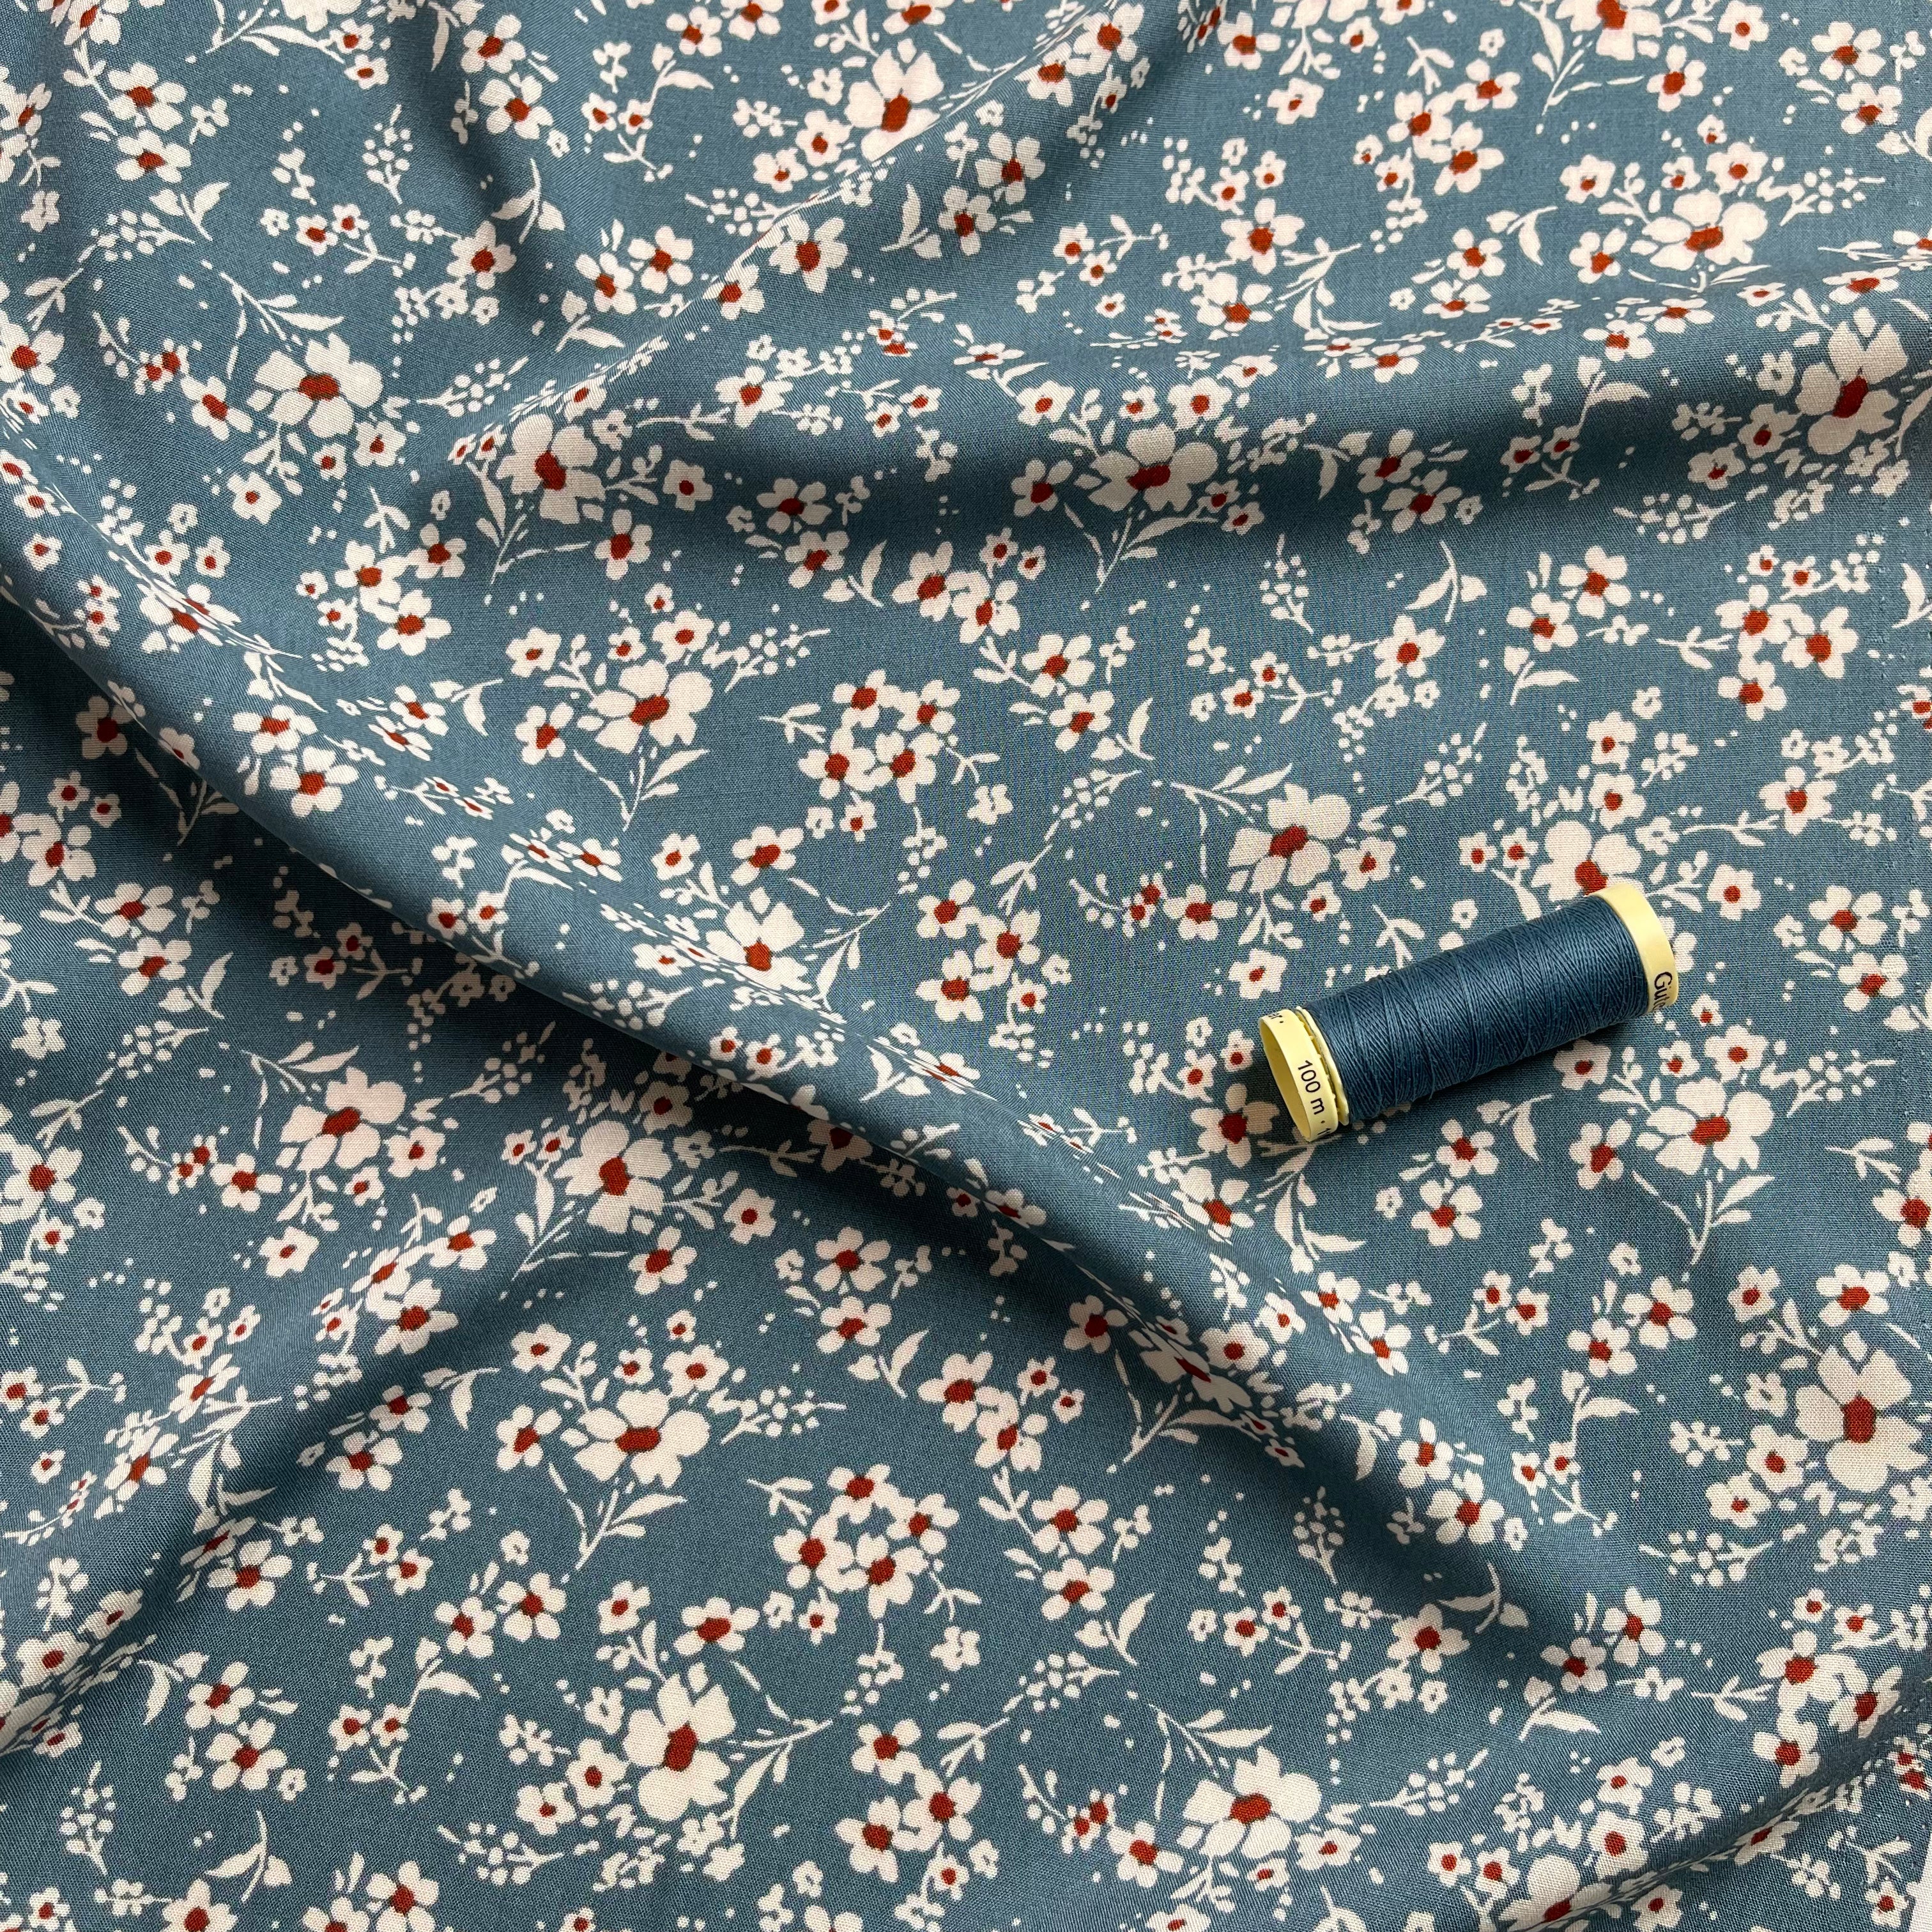 Ditsy Meadow on Dusty Blue Viscose Fabric